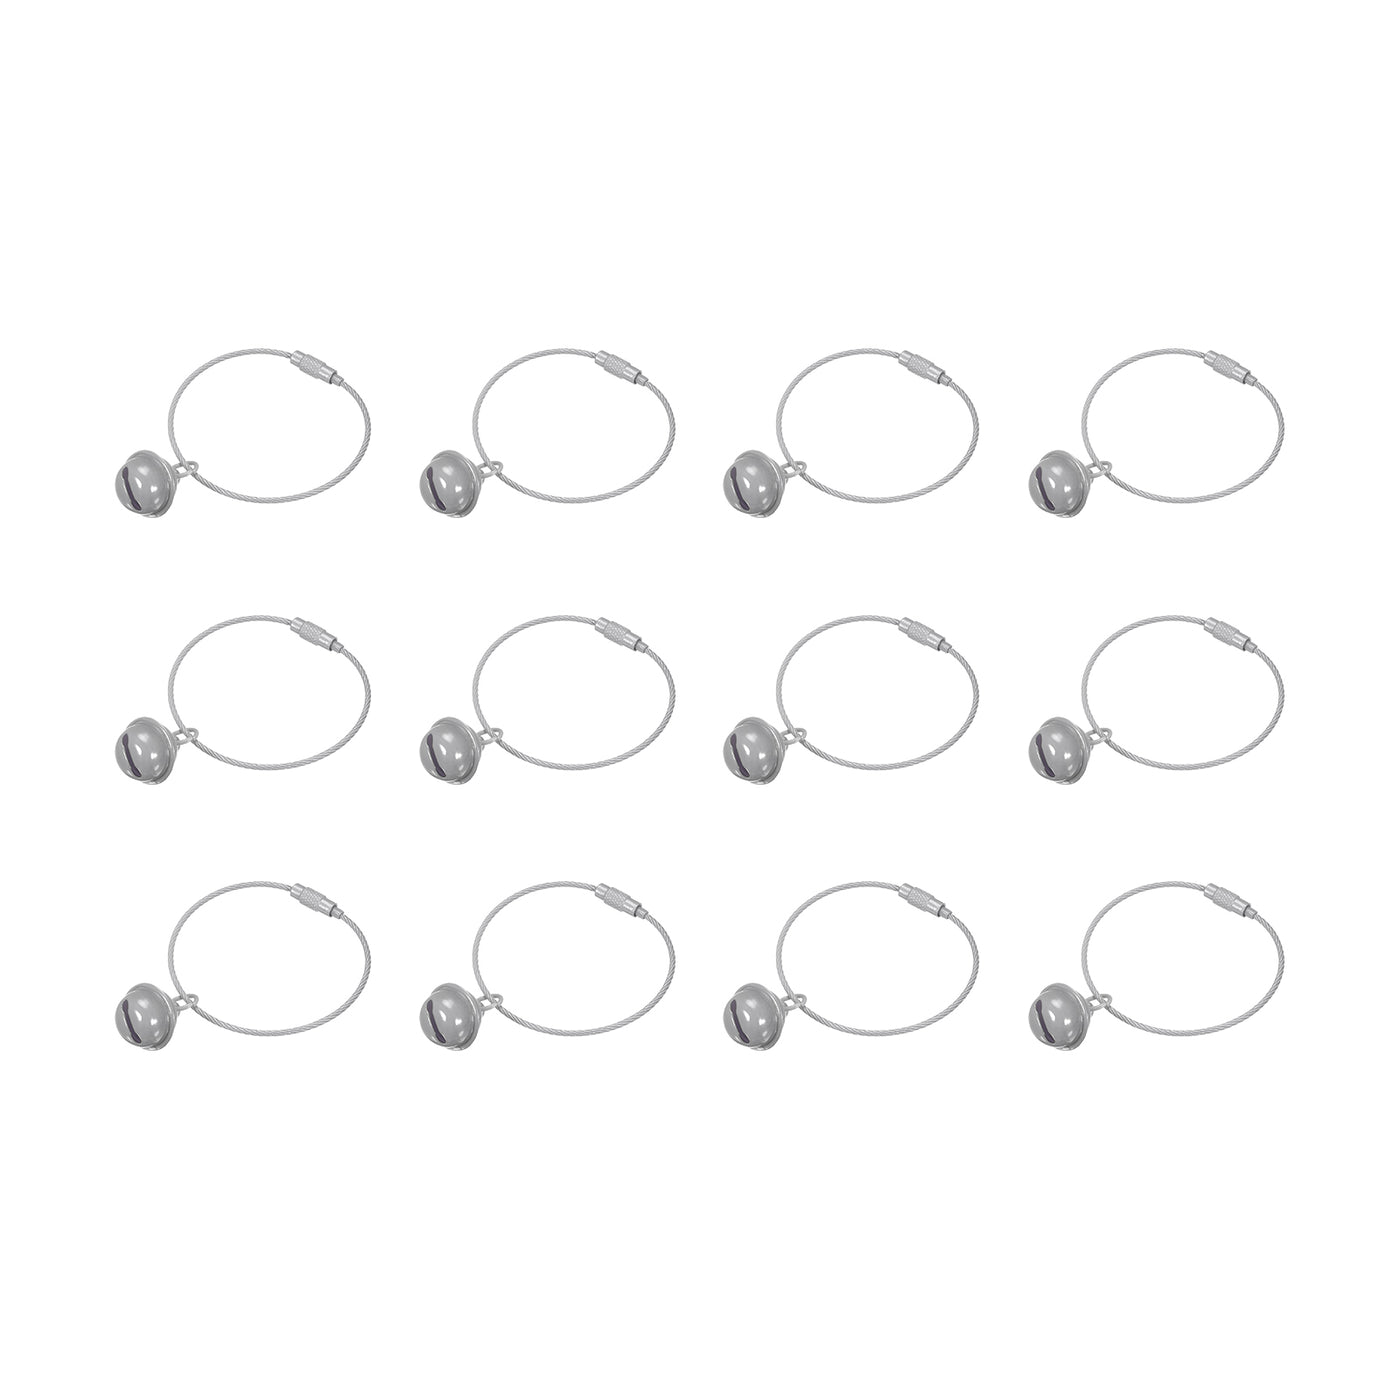 uxcell Uxcell 12Pcs Pet Bells, Stainless Steel 50mm/1.97" Dia Jingle Bells Cable Grey for DIY